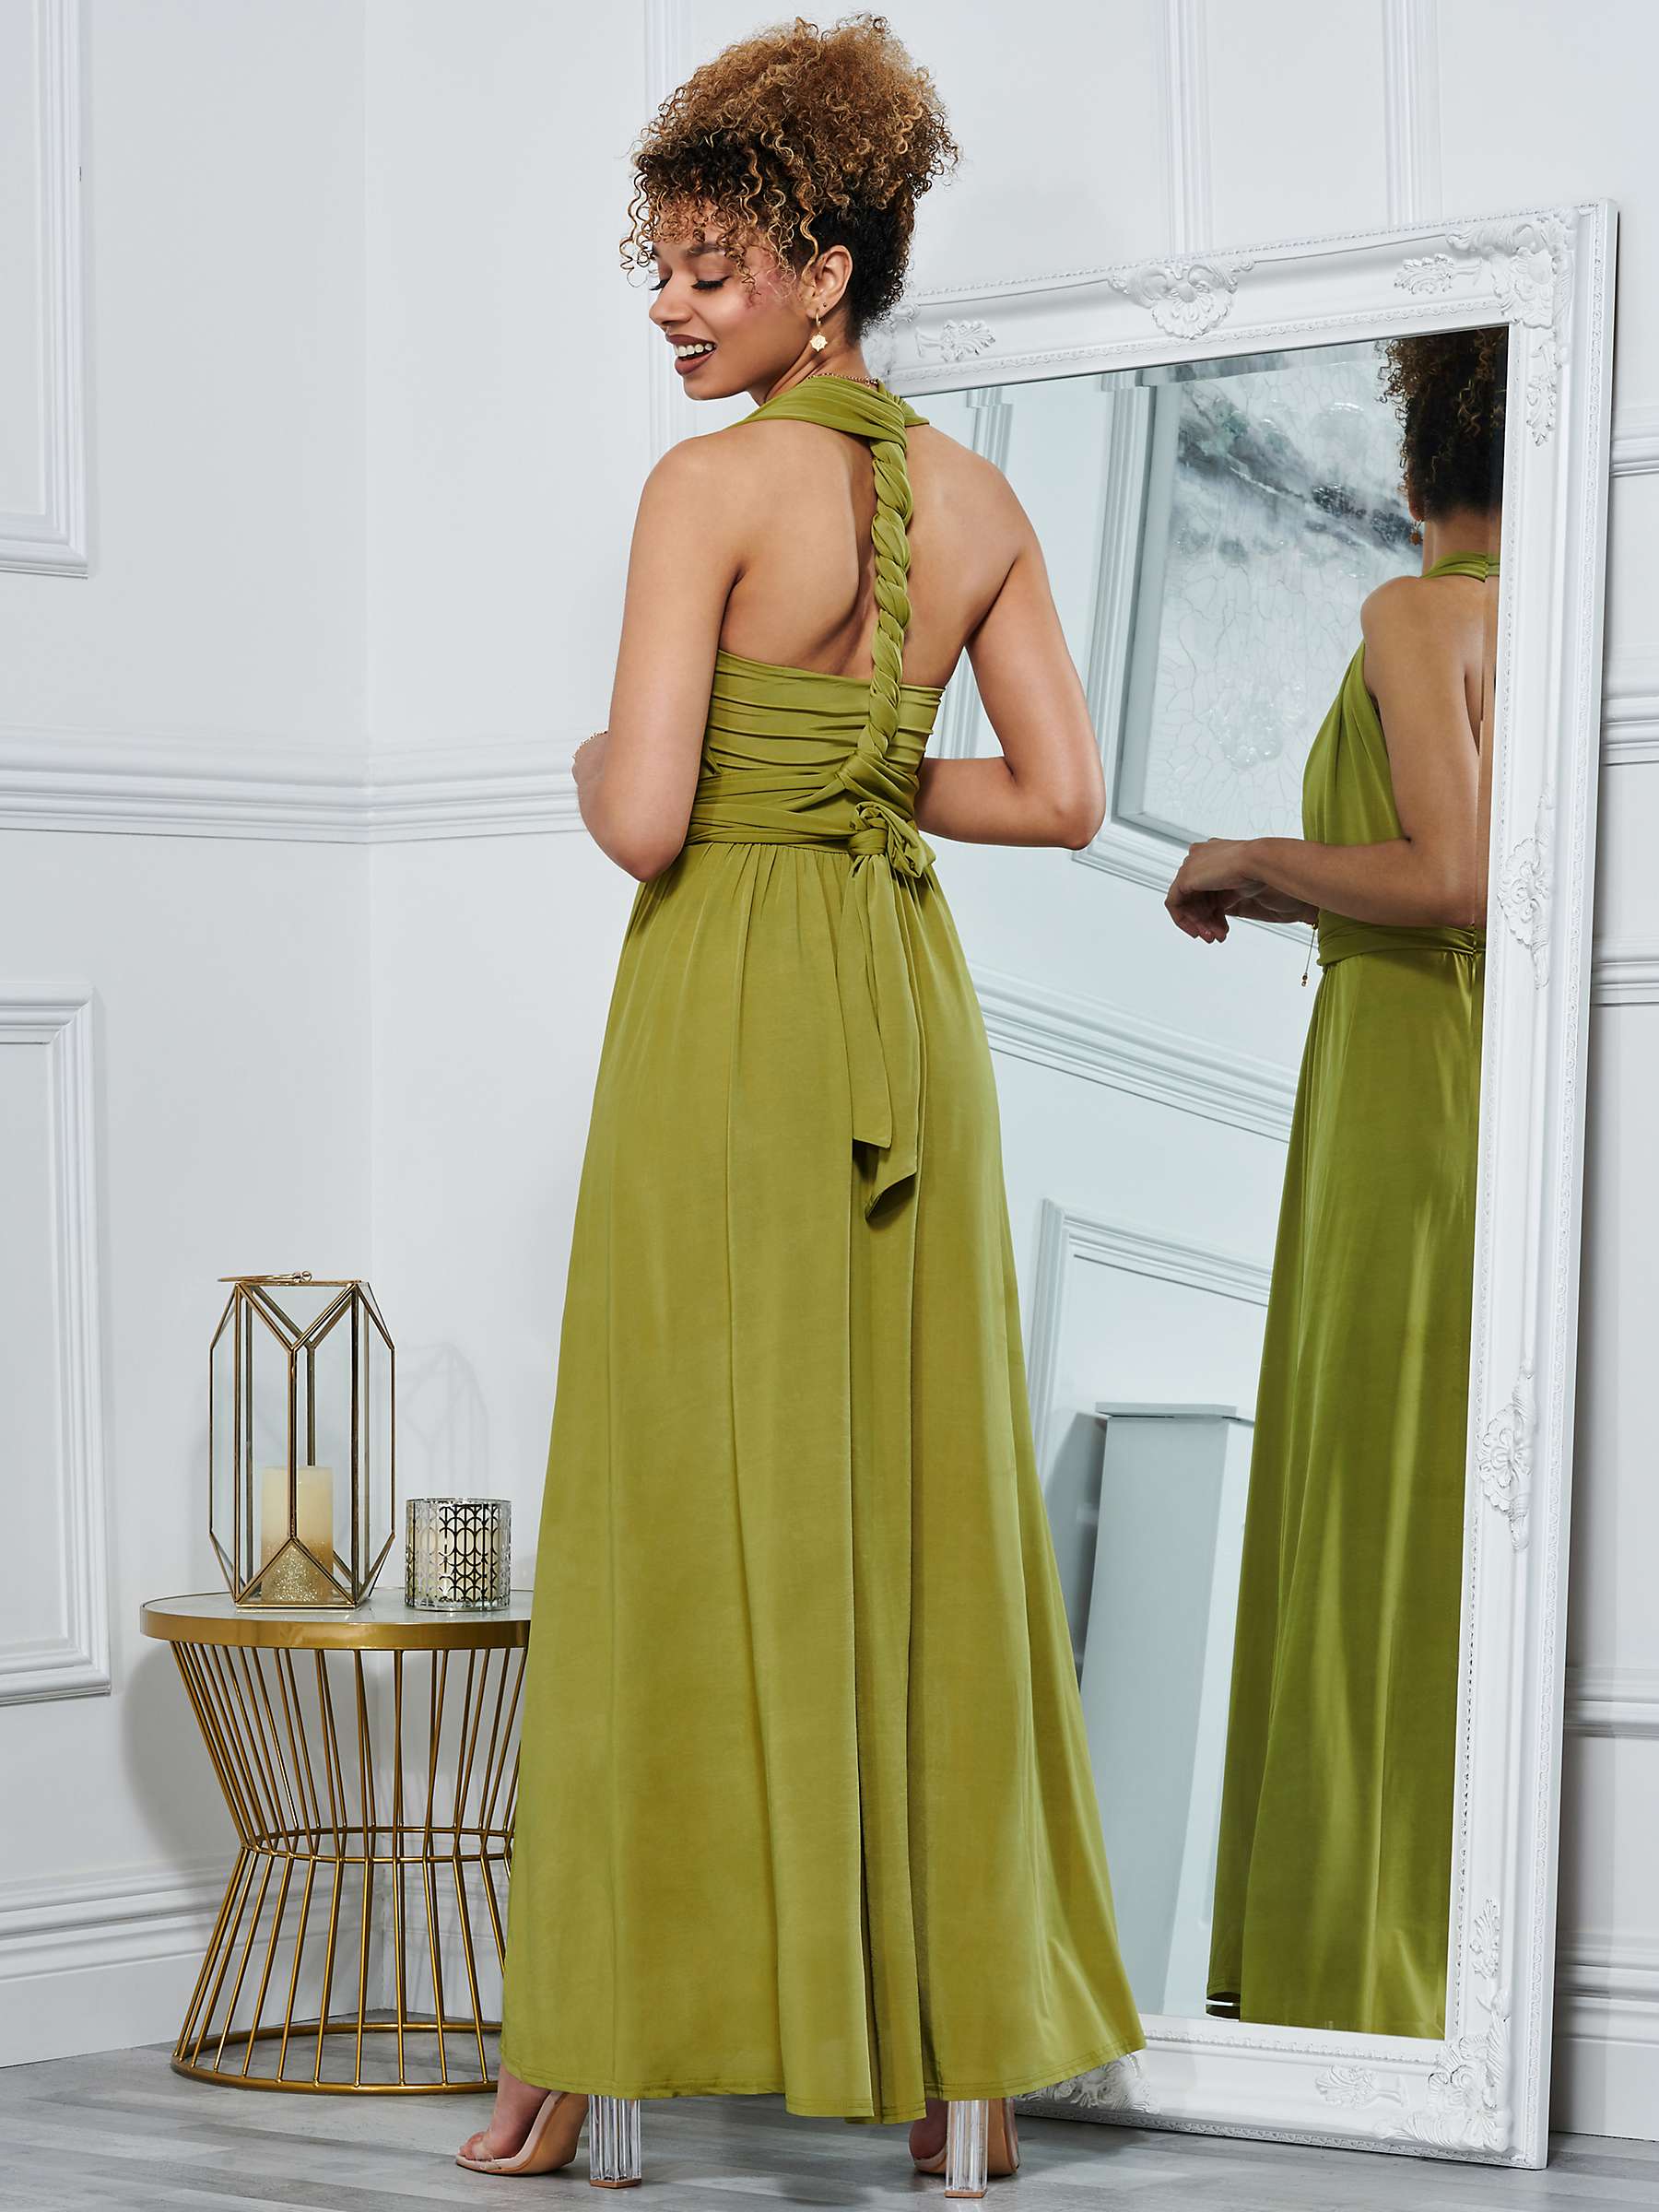 Buy Jolie Moi Bridesmaid Multiway Maxi Dress, Olive Green Online at johnlewis.com